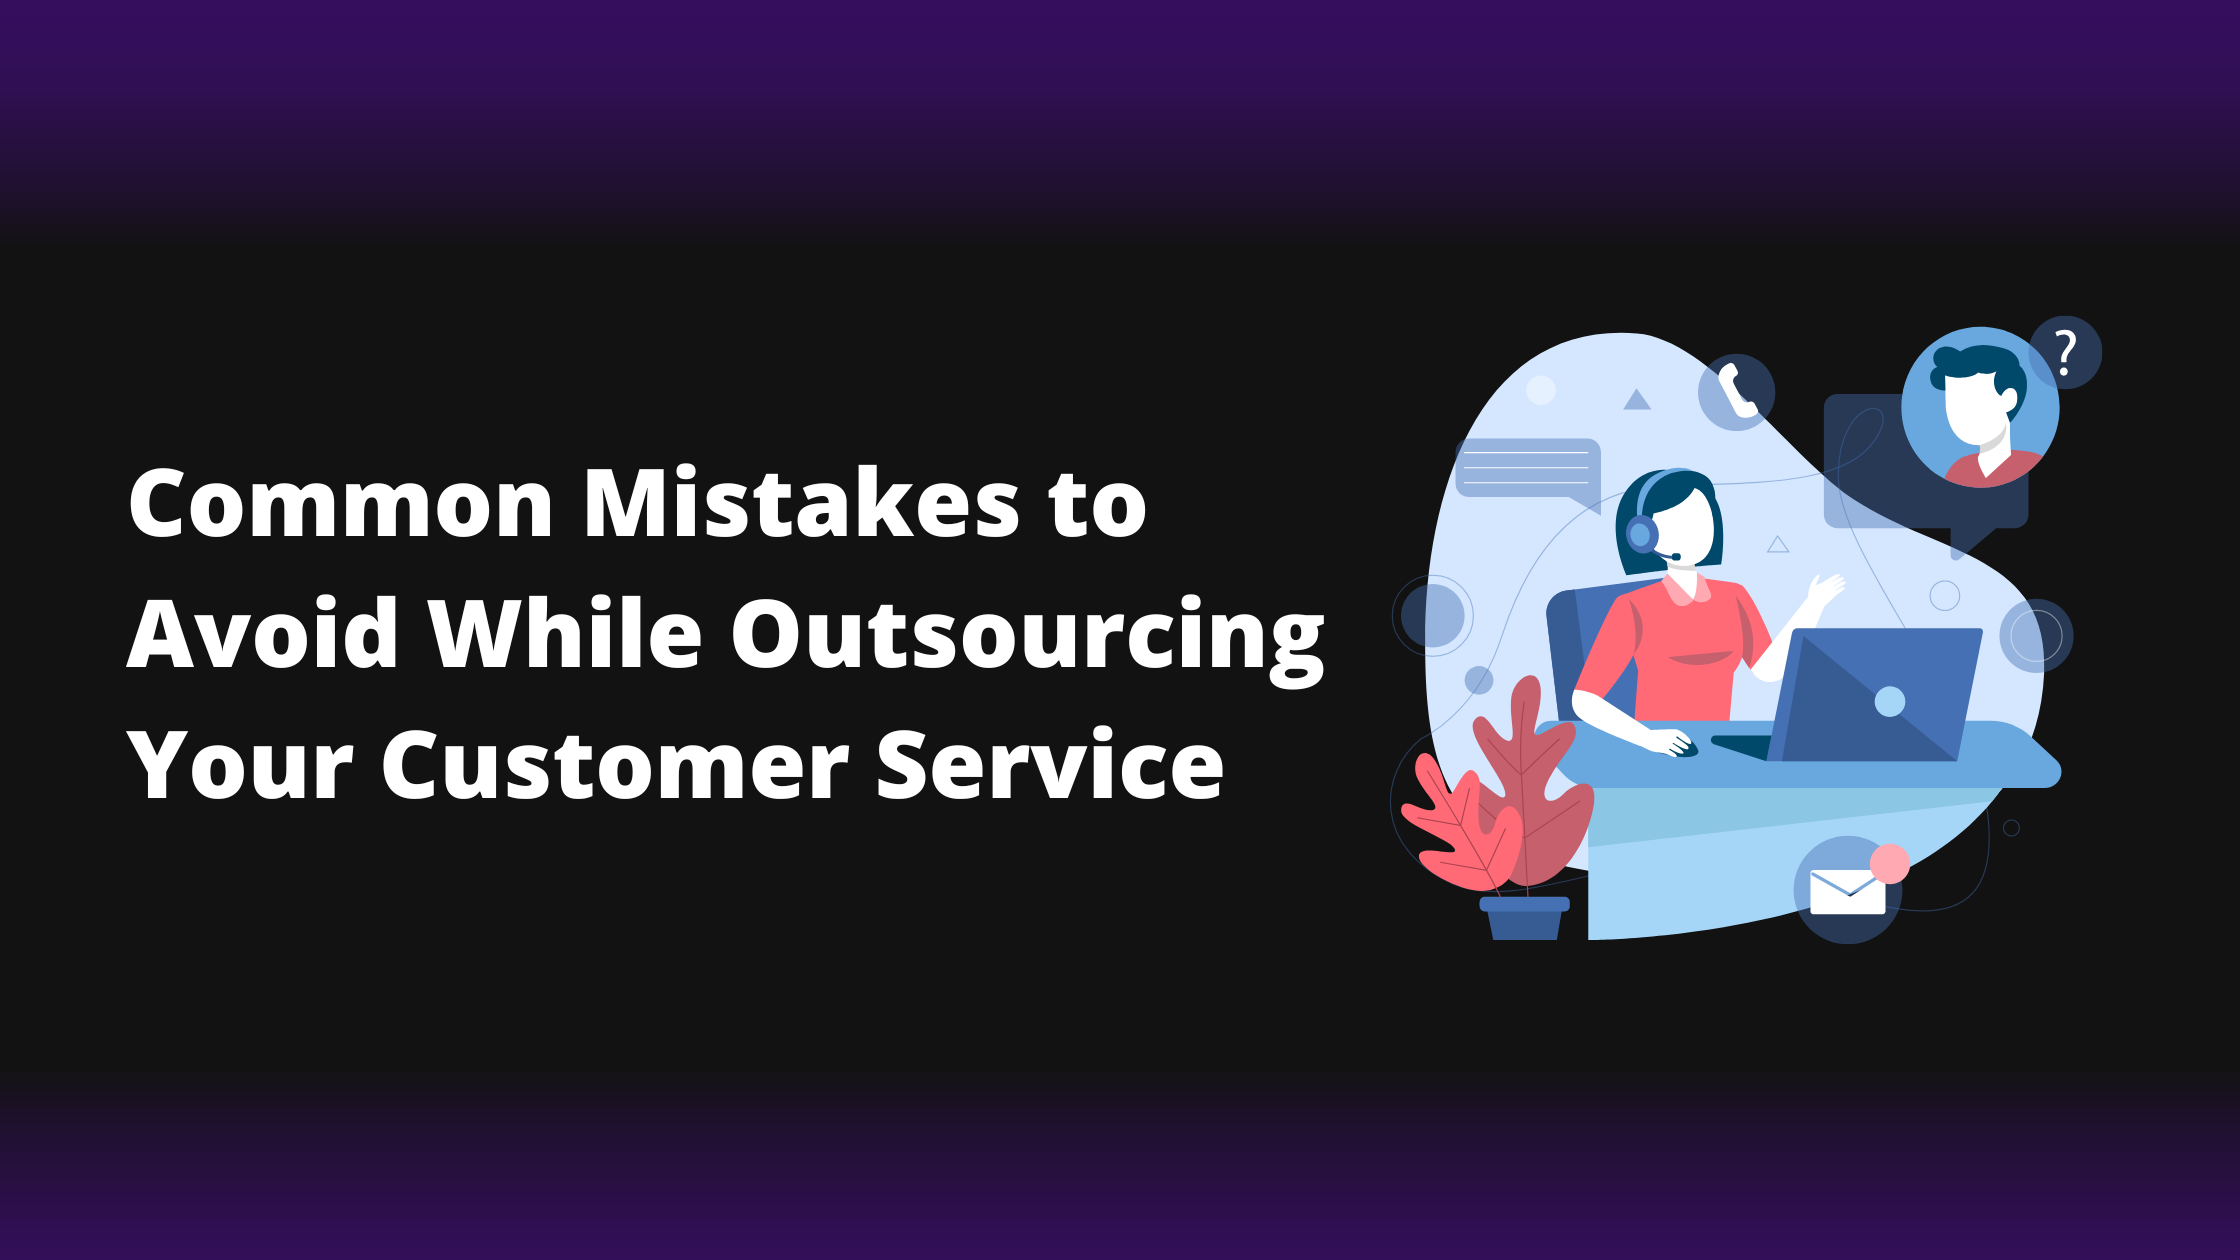 Common Mistakes To Avoid While Outsourcing Your Customer Service